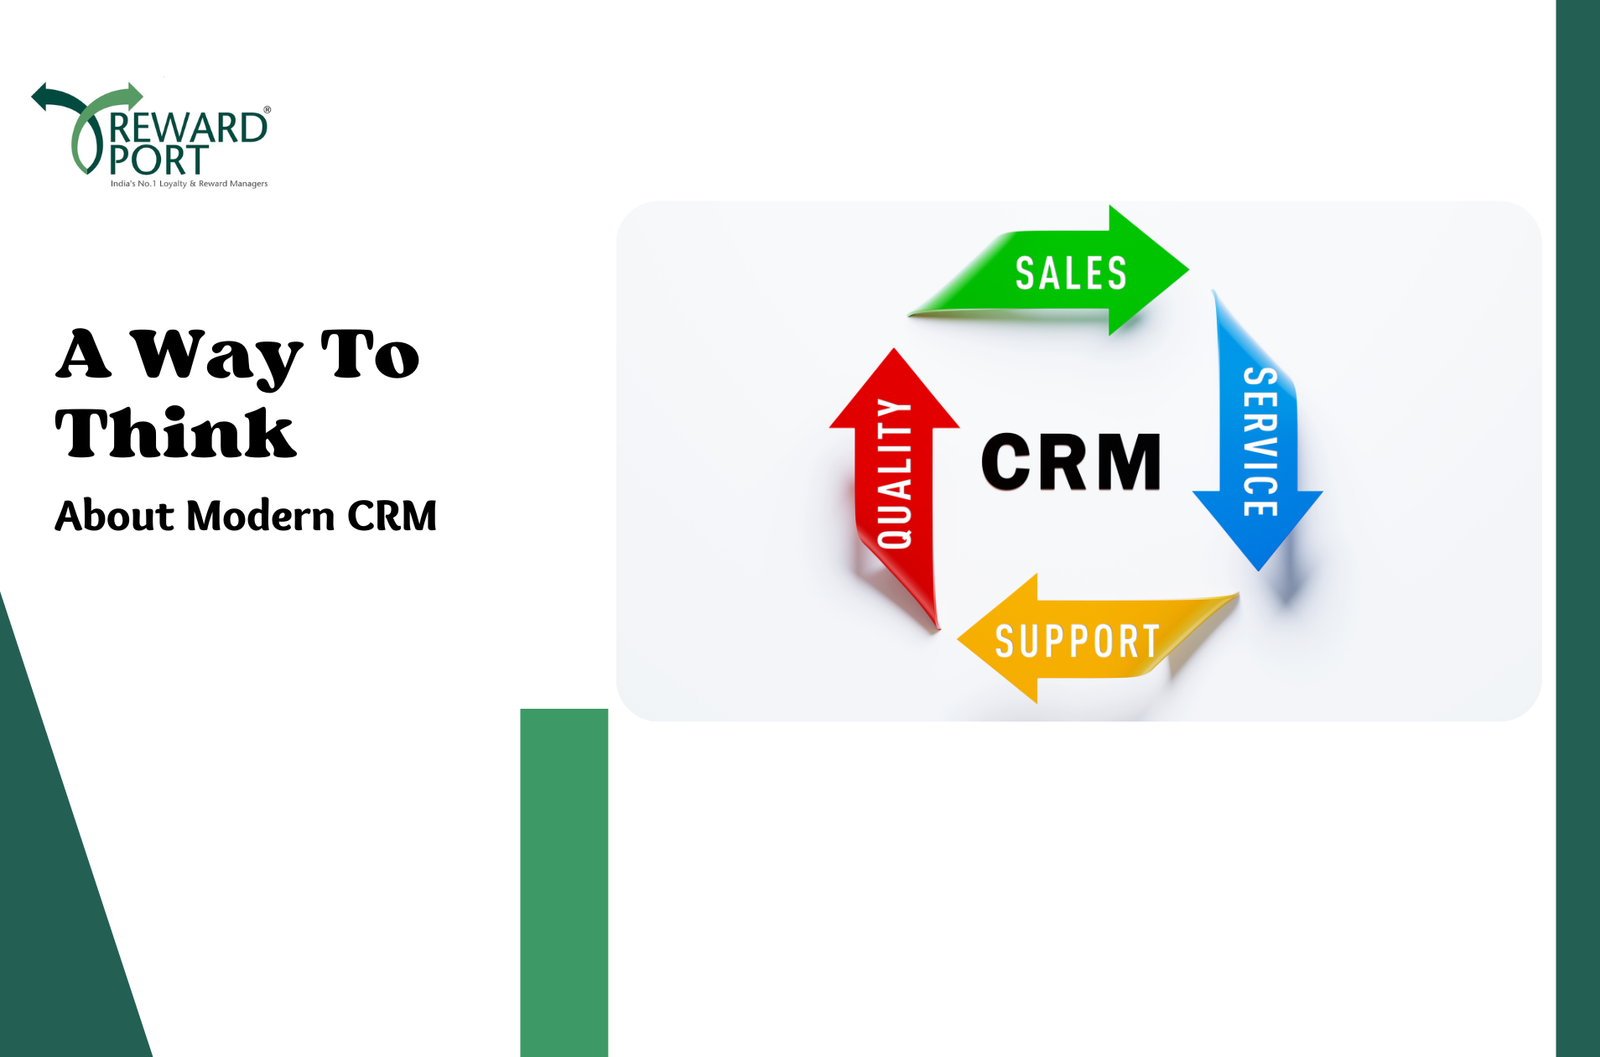 A Way To Think About Modern CRM